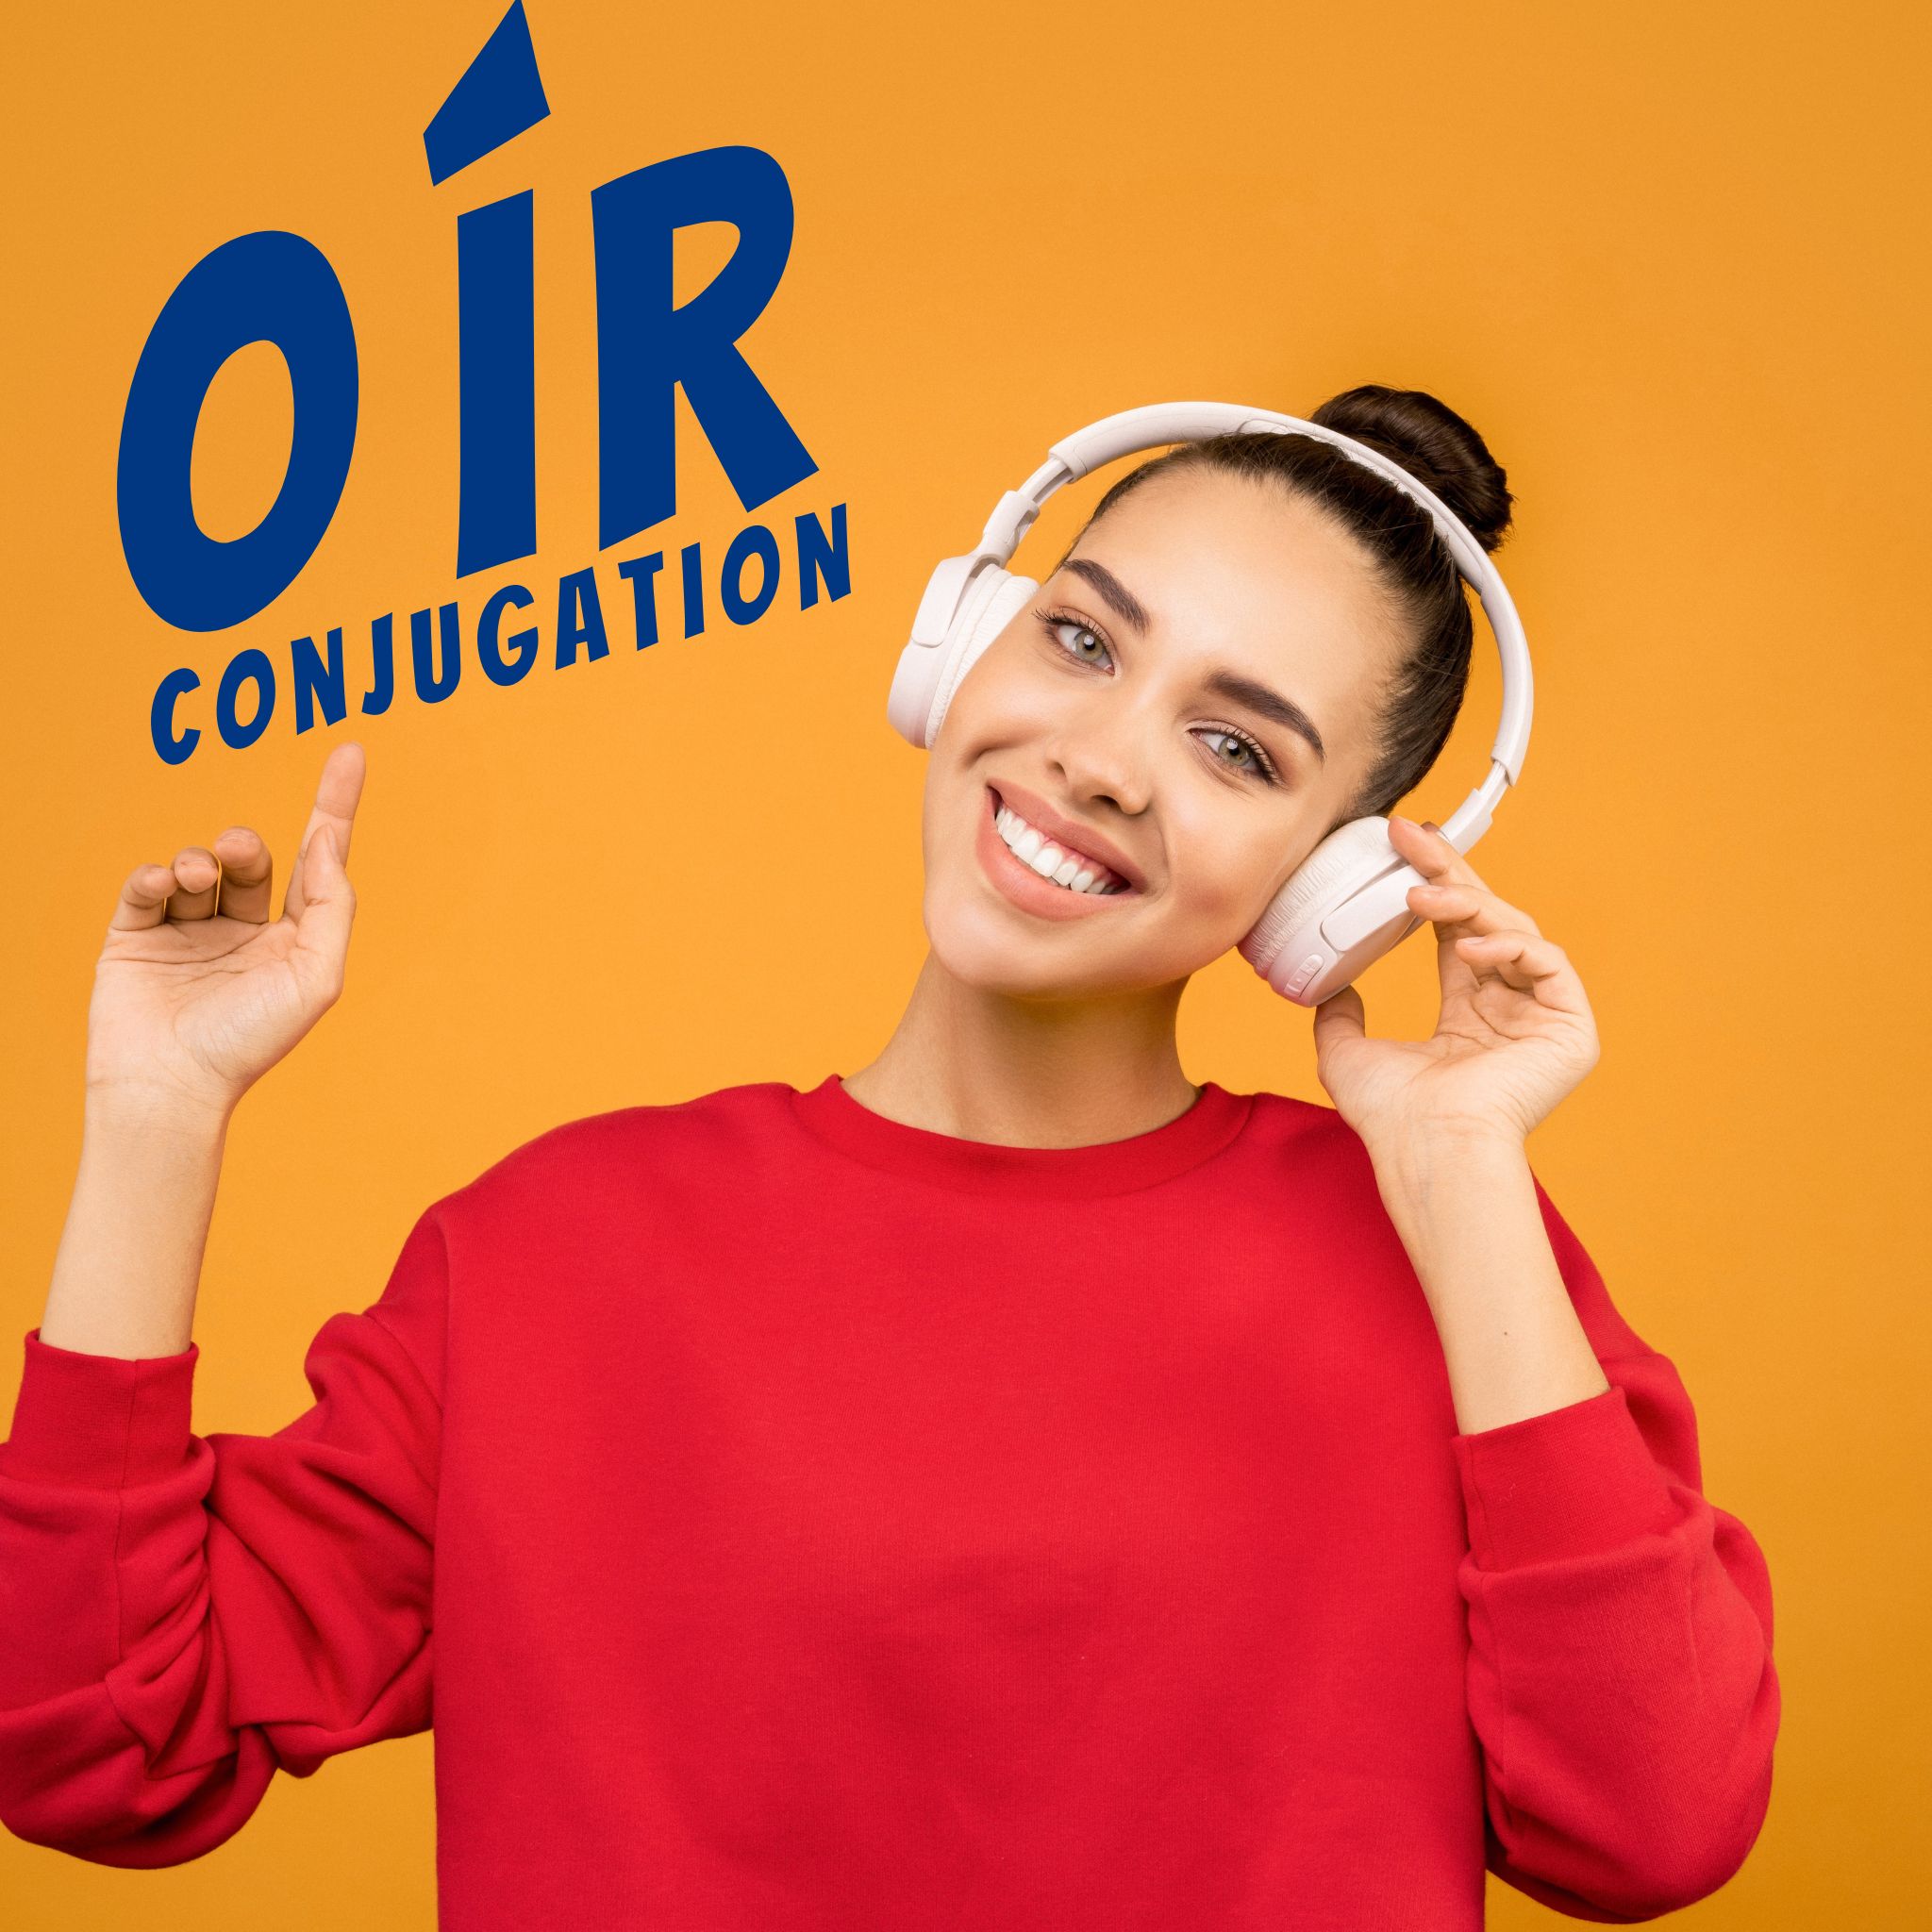 Oír conjugation: Every tense, every mood, and a bunch of examples